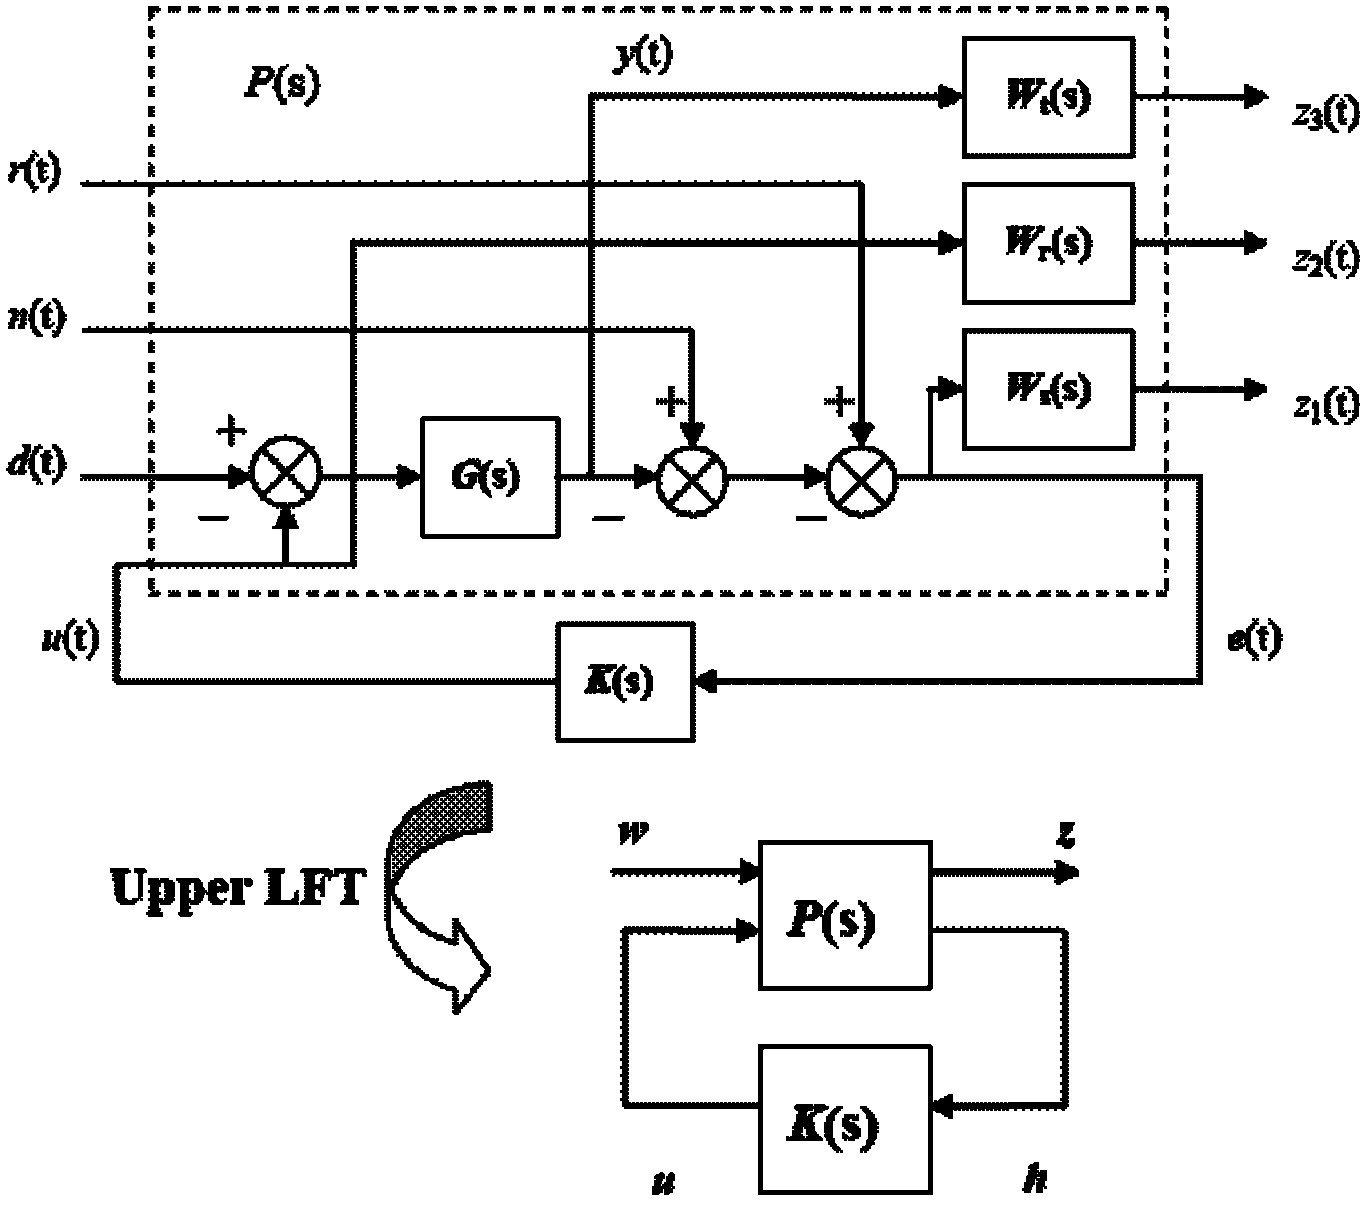 Control method for two degrees of freedom (2DOF) of proton exchange membrane type fuel cell (PEMFC) system based on optimal oxygen enhancement ratio (OER)